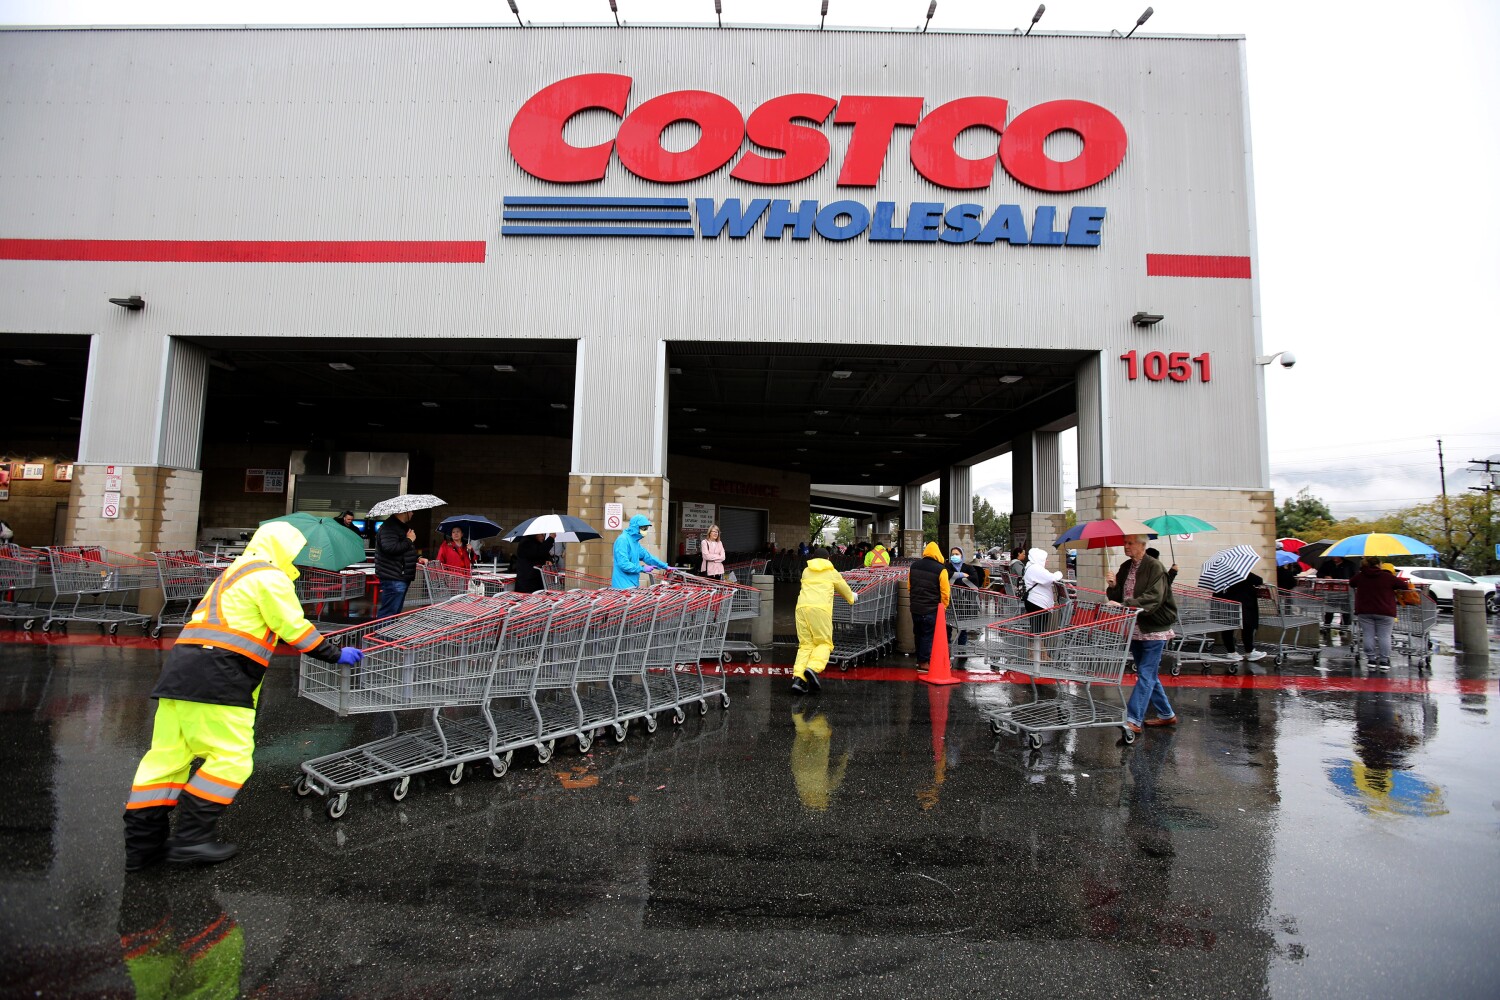 Costco food court raises prices on chicken bake, drinks amid inflation